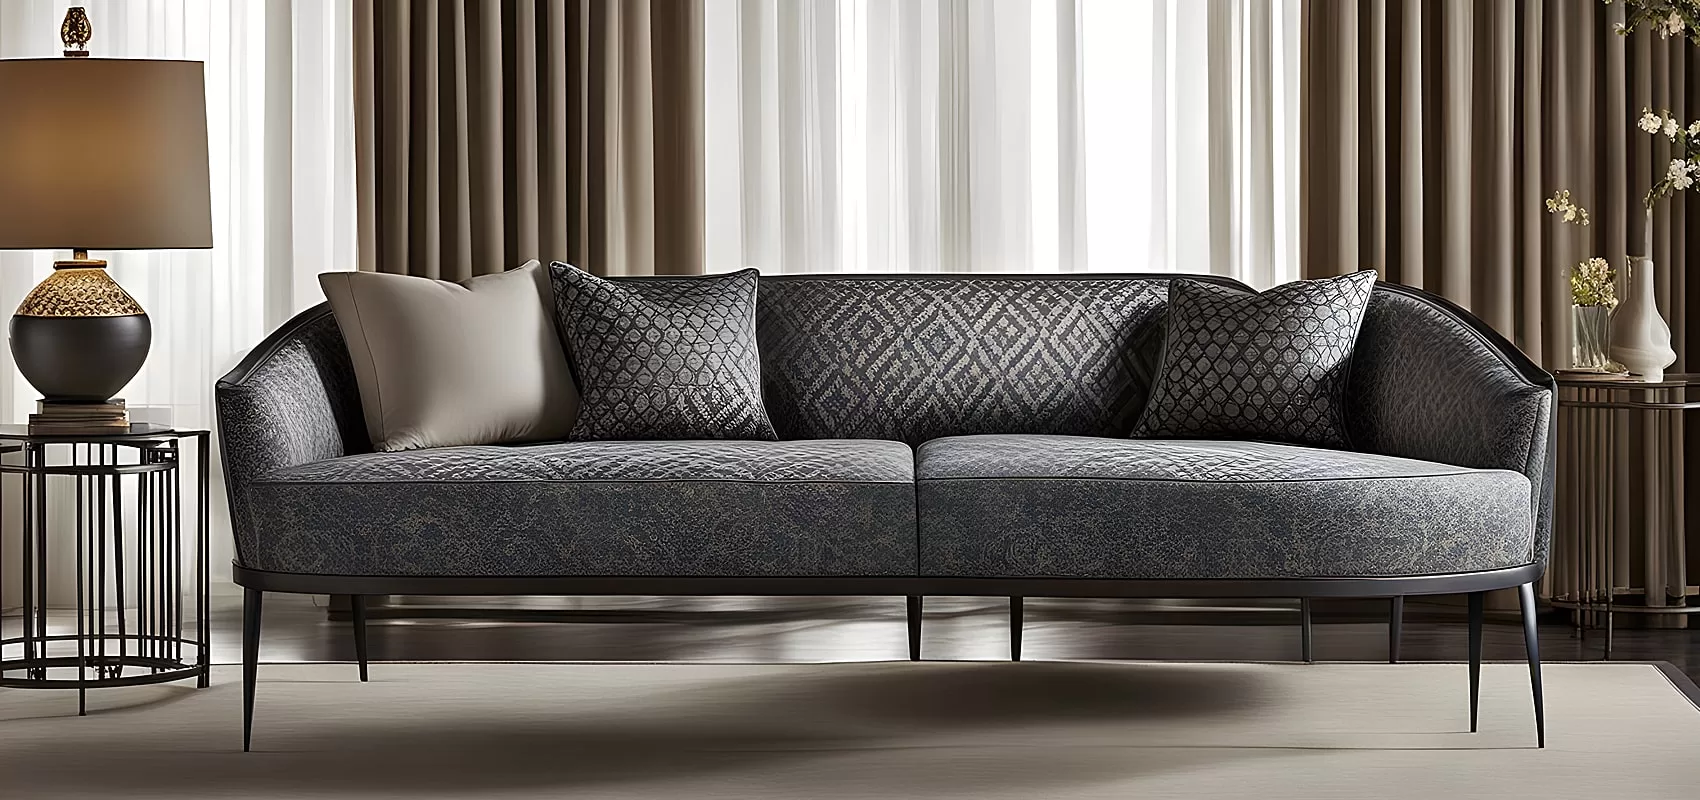 Contemporary Sofa | Contemporary Sofa Set | Contemporary Couches 